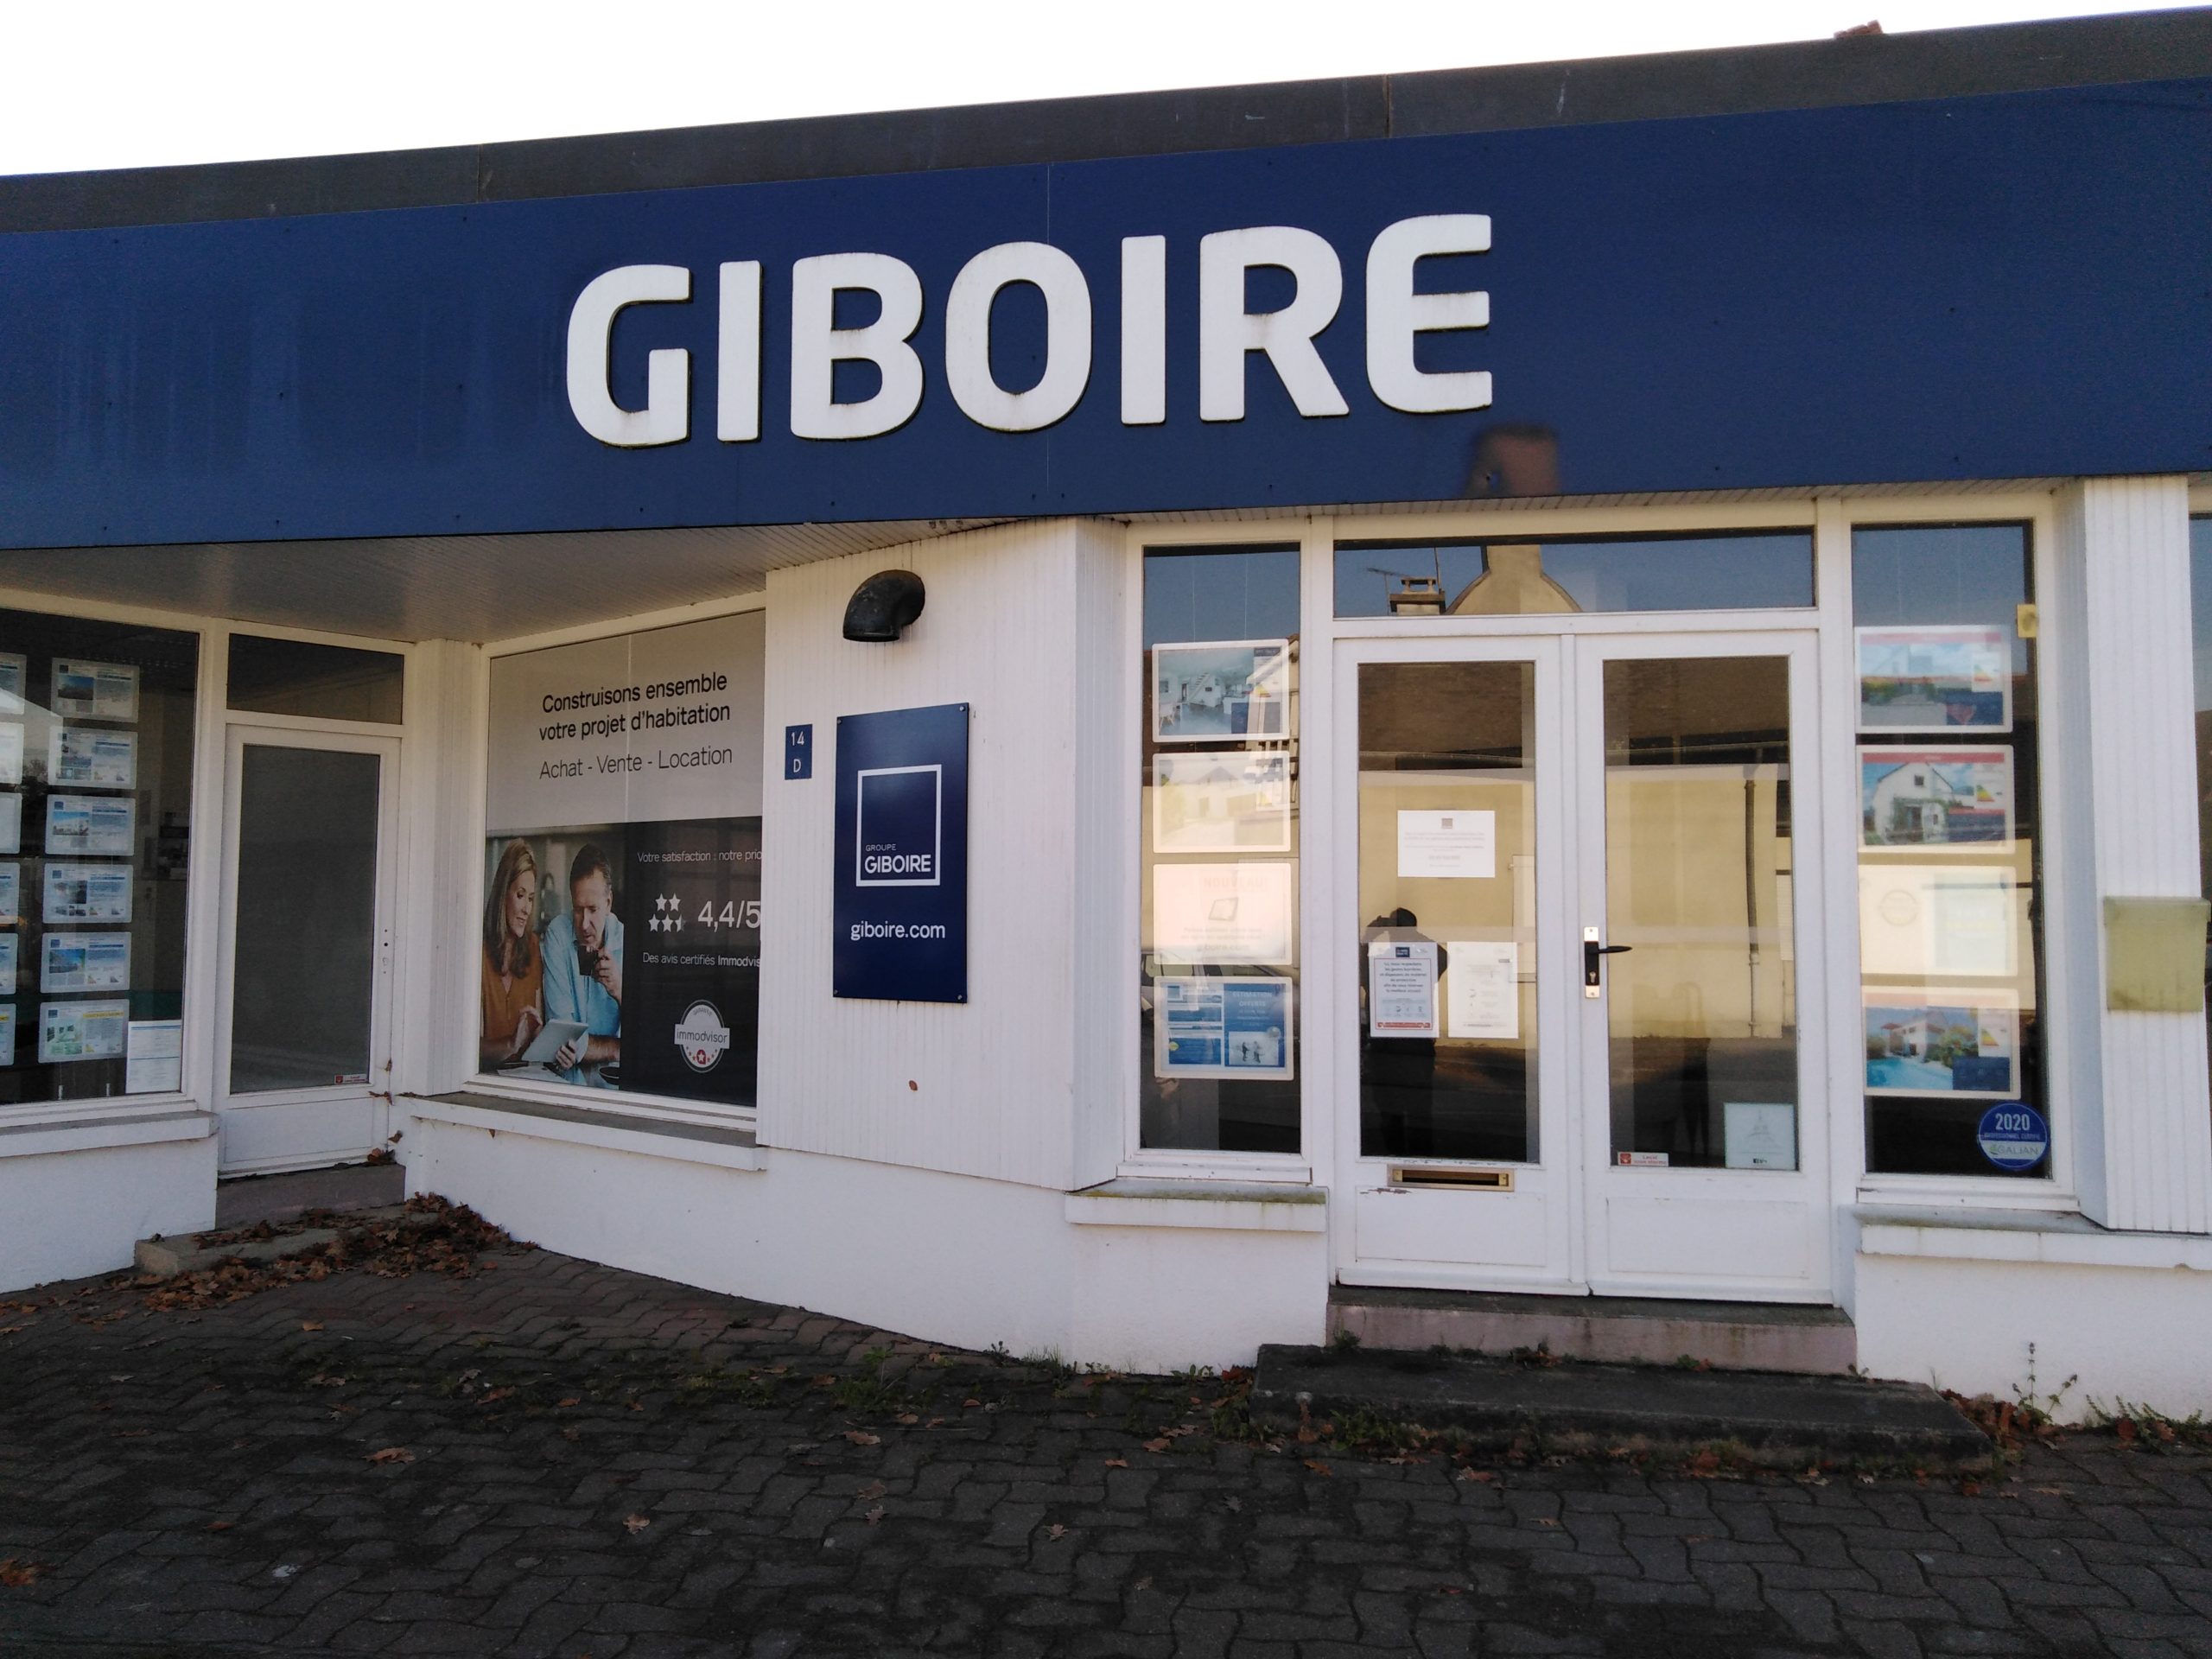 Giboire Location ouest - PACE